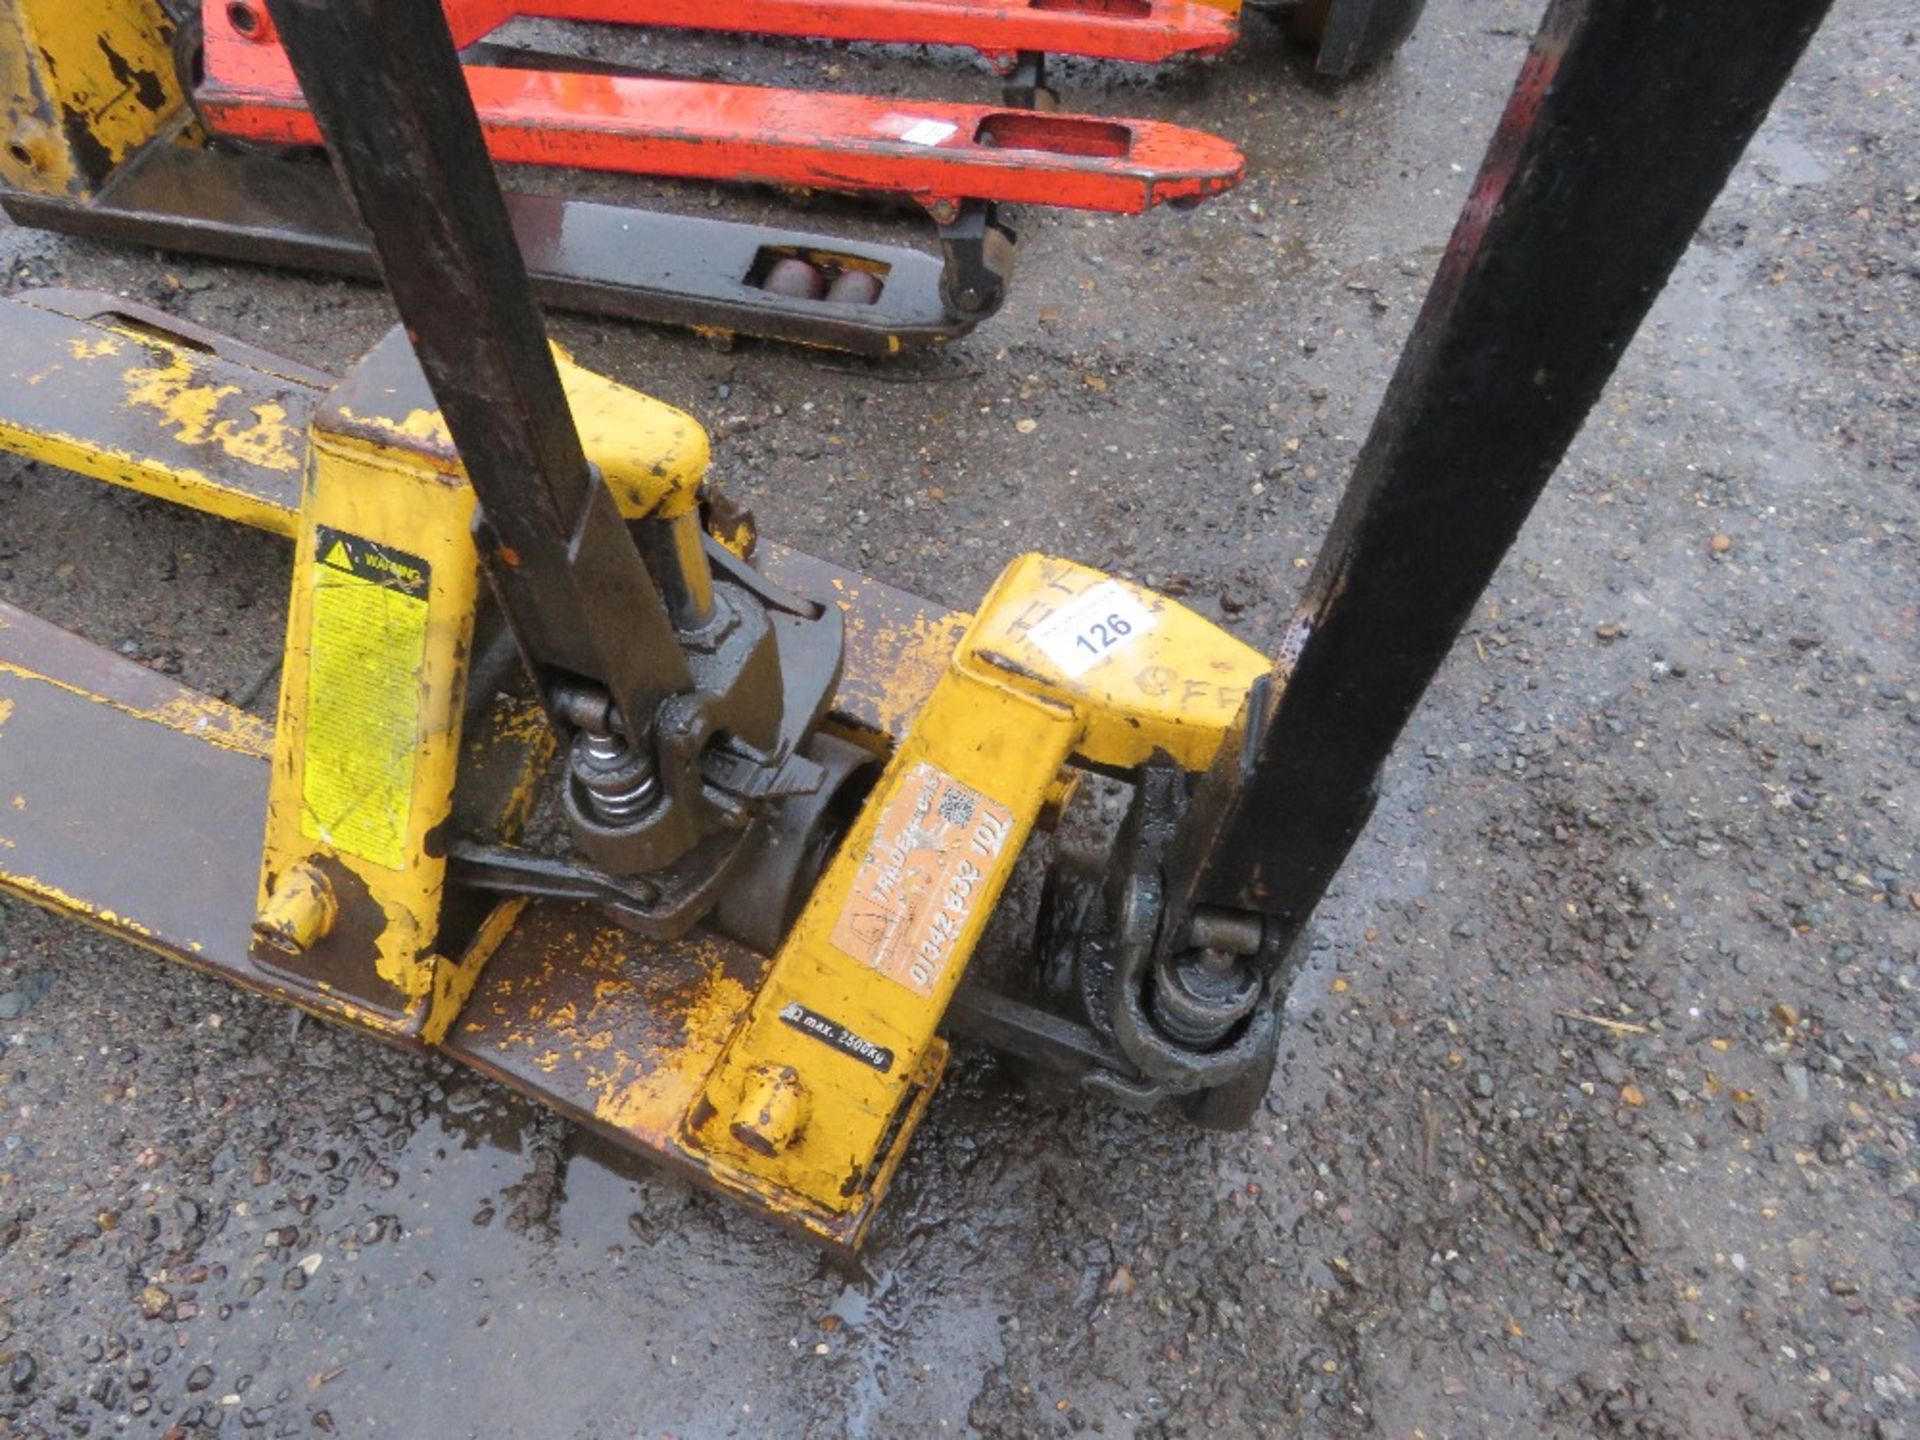 2 X MANUAL PALLET TRUCKS, CONDITION UNKNOWN. SOURCED FROM COMPANY LIQUIDATION. - Image 3 of 3